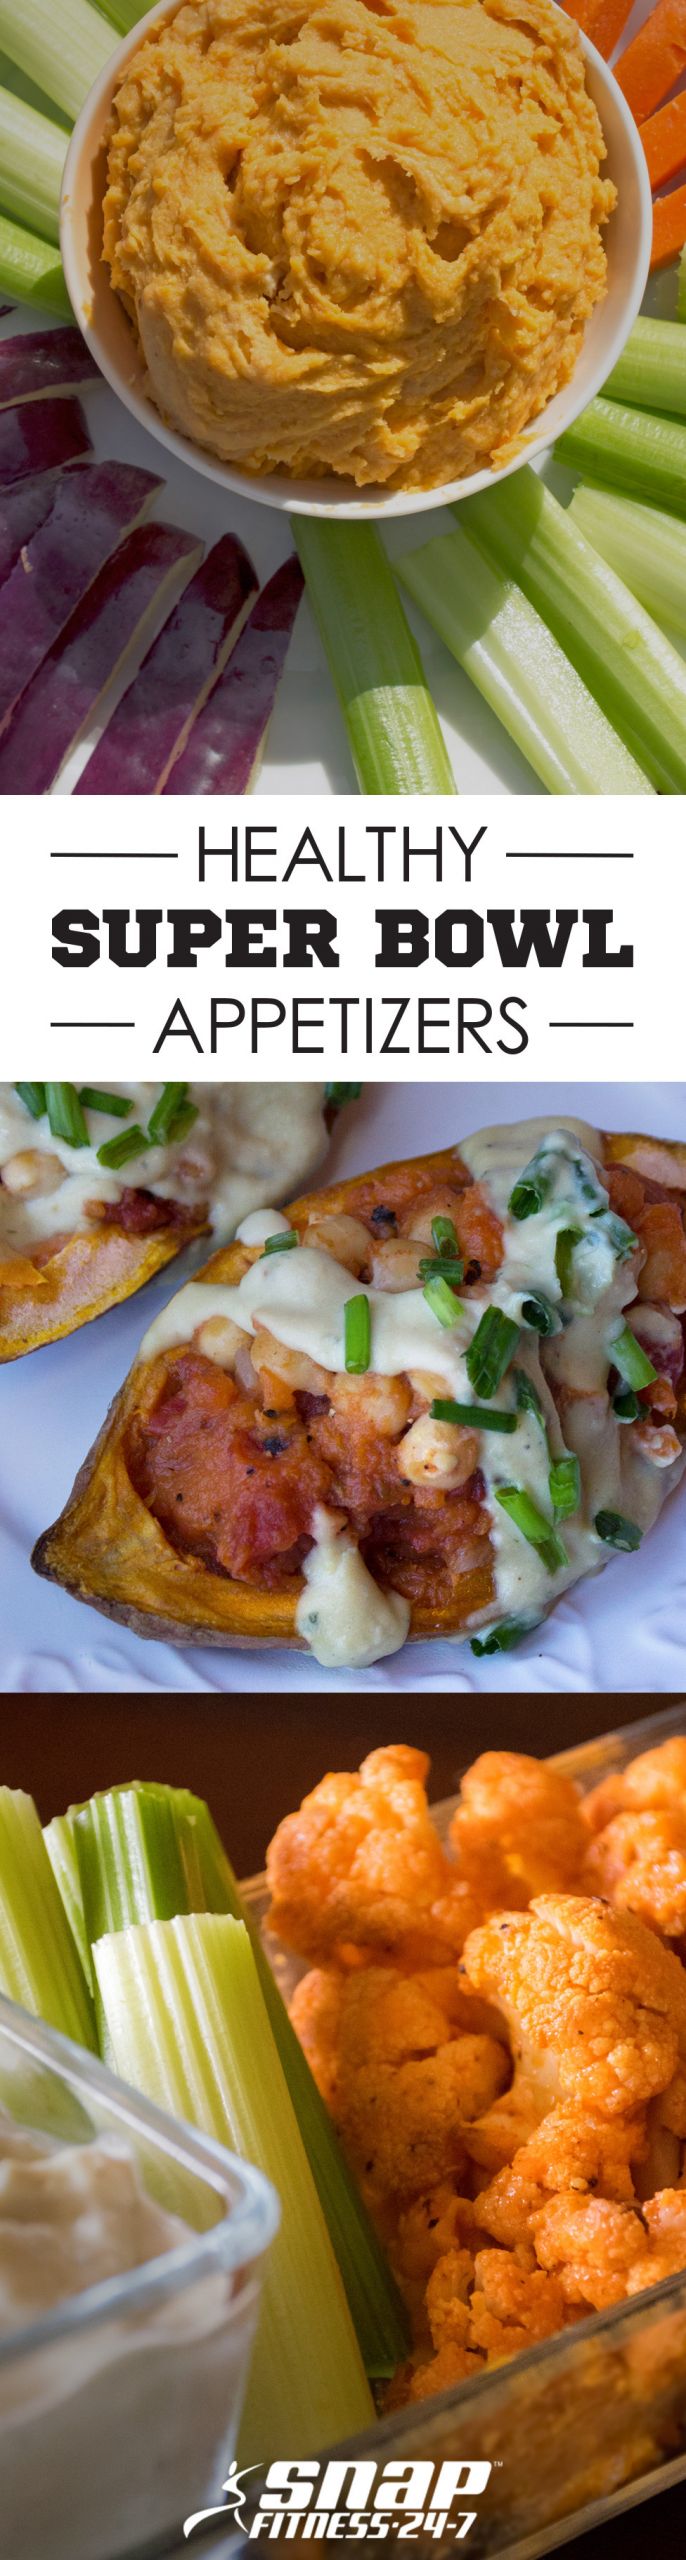 Healthy Football Appetizers
 Tasty and healthy appetizers that will have football